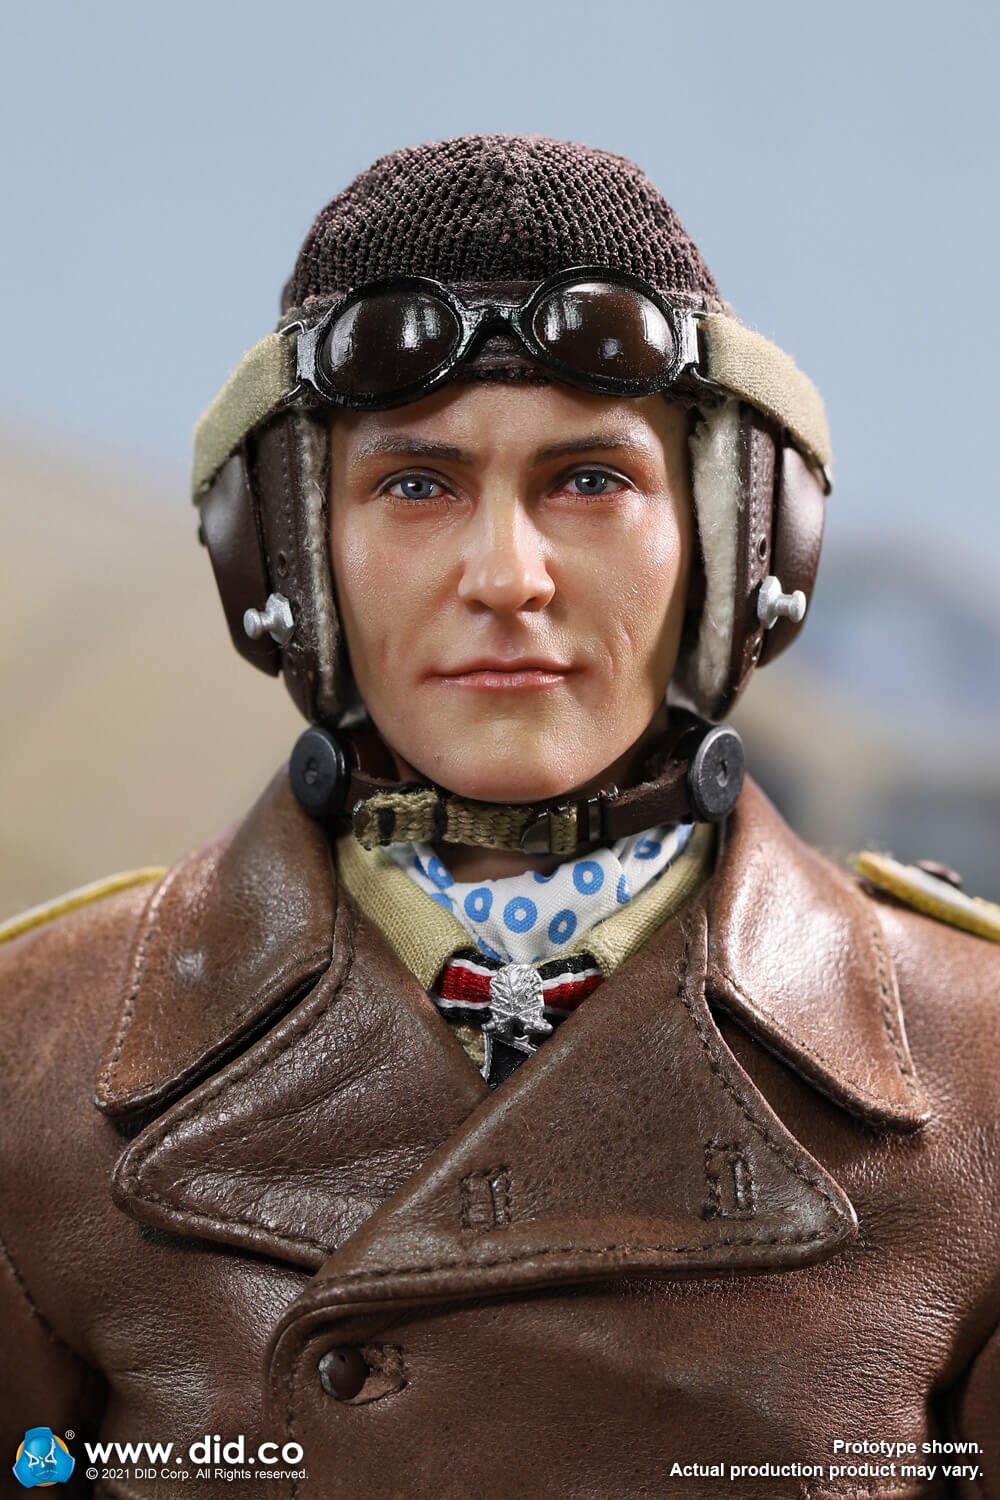 NEW PRODUCT: D80154 WWII German Luftwaffe Flying Ace “Star Of Africa” – Hans-Joachim Marseille & E60060  Diorama Of “Star Of Africa” 5516